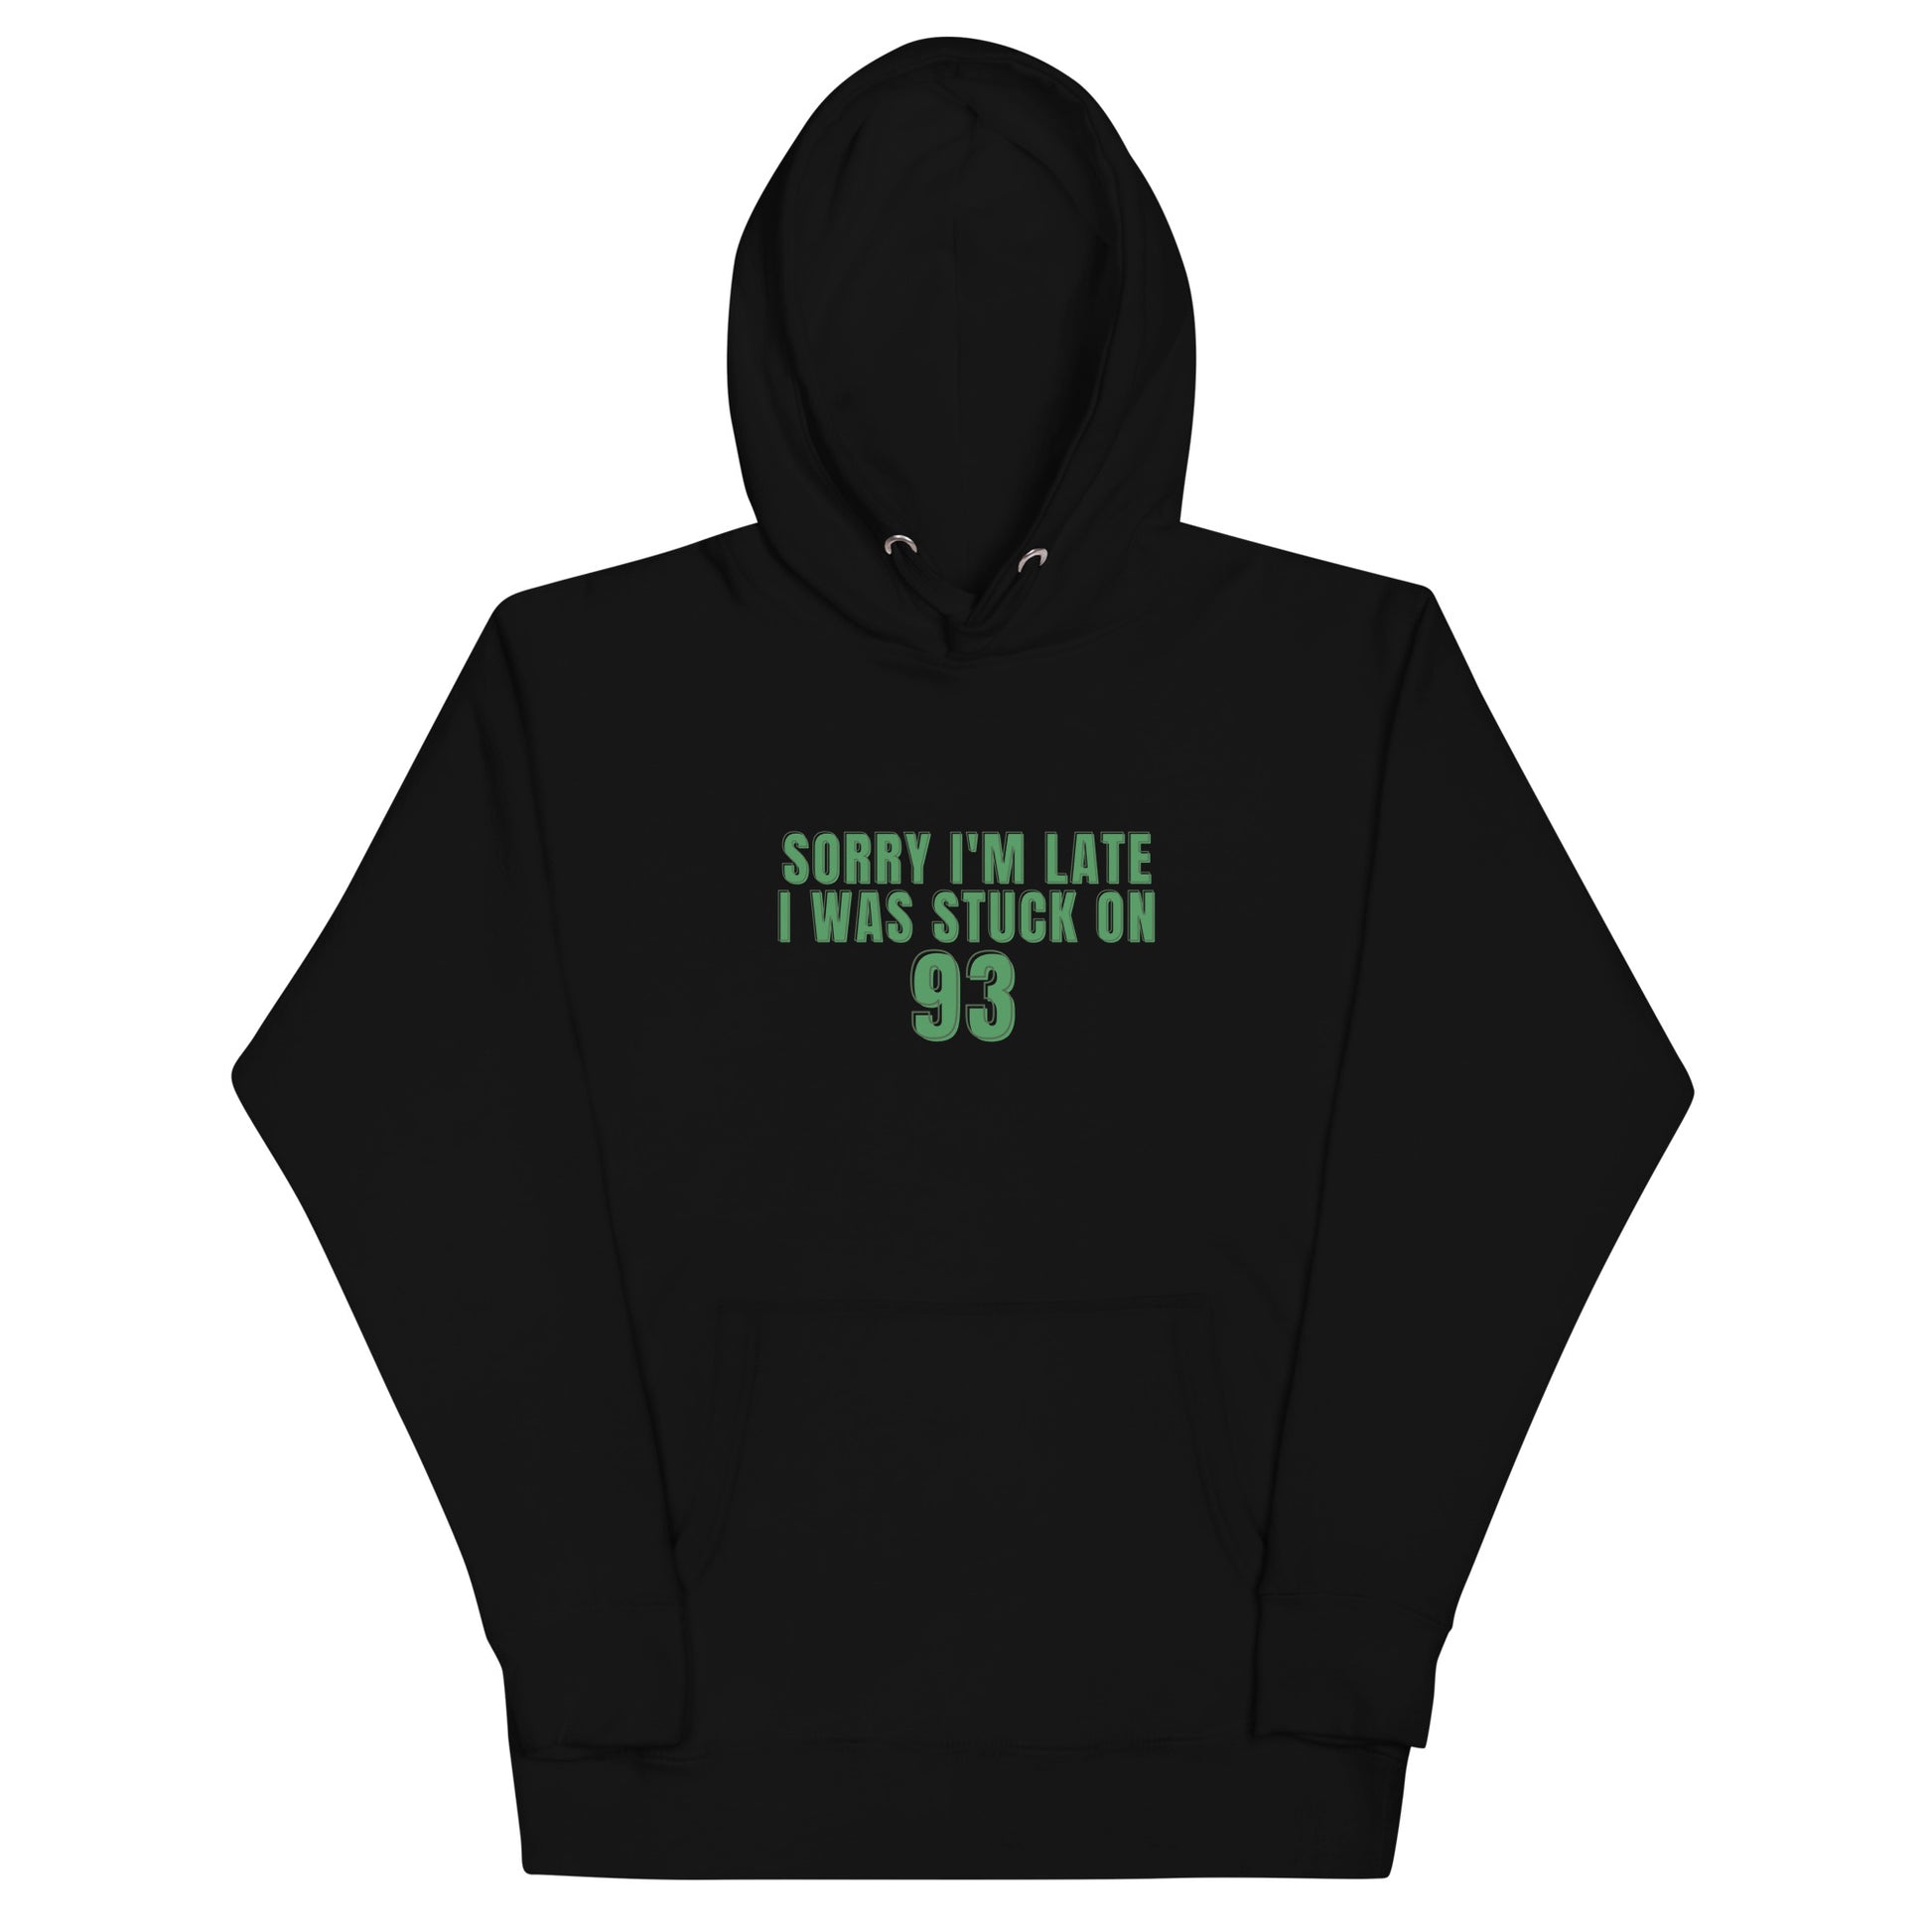 black hoodie that says "sorry i'm late i was stuck on 93" in green lettering